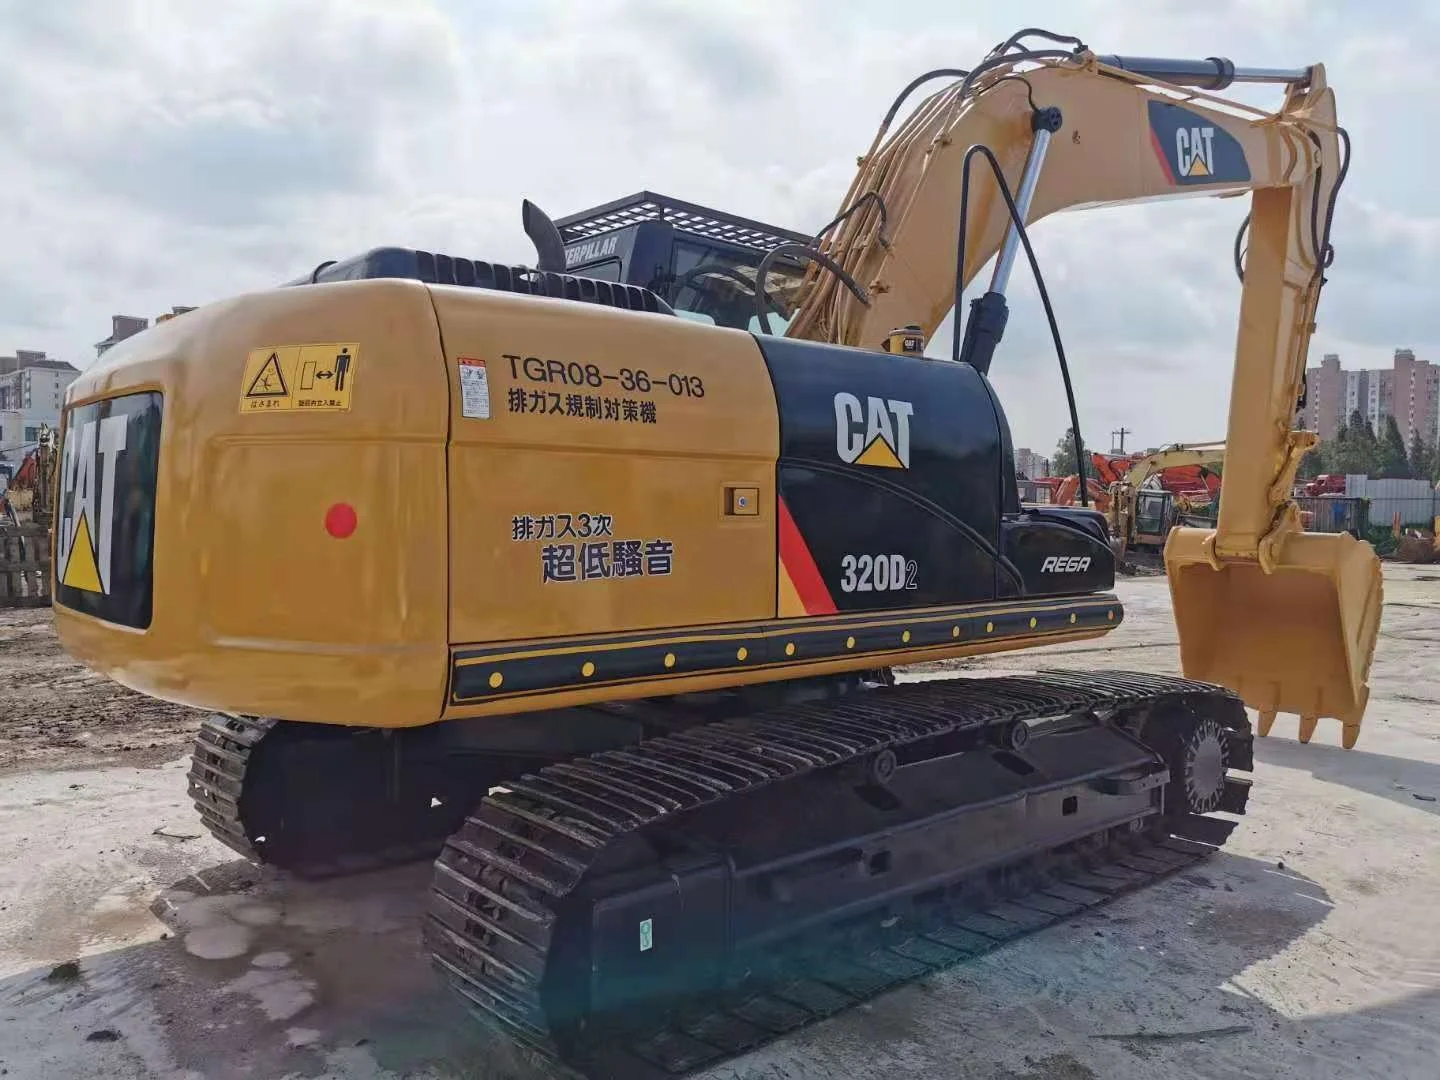 Used hydraulic original Durable Machine CAT 320D Excavator For Sale Good Price With High Quality